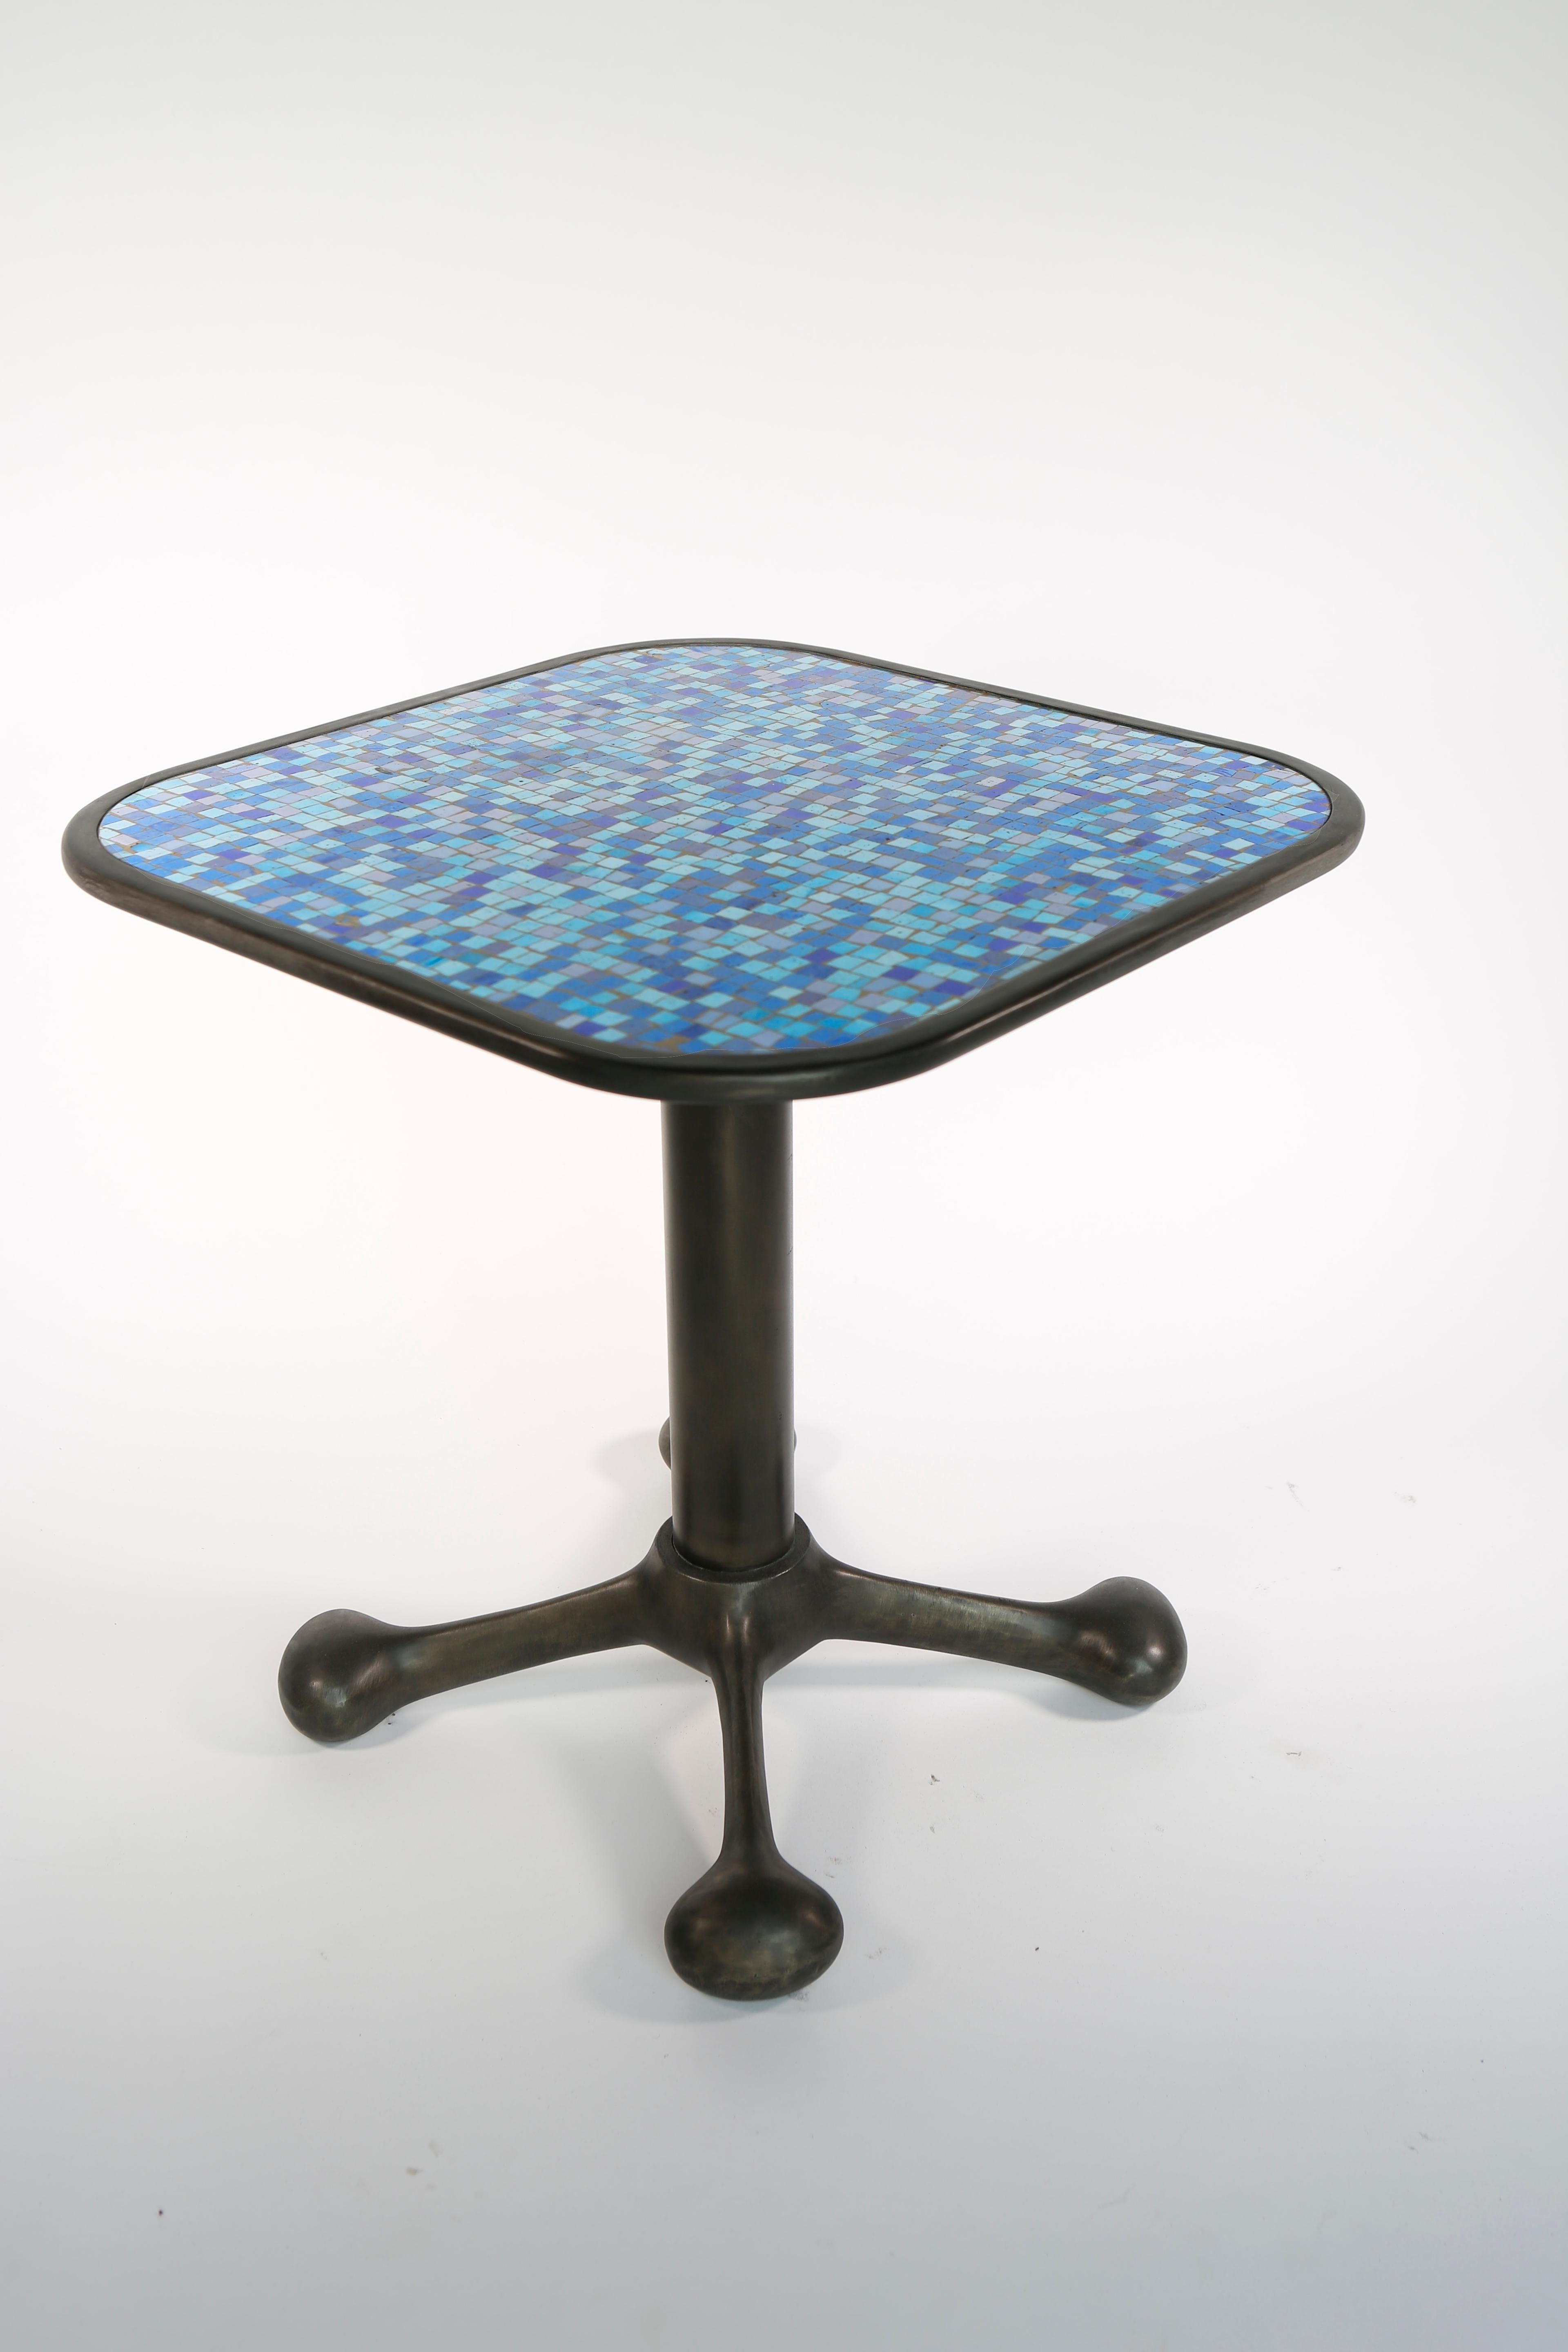 Jordan Mozer (b. 1958), I.C.E. side tables, polished glass mosaic, cast recycled aluminum, Chicago, 2001. Created for Bellagio Resort Hotel. Collection of the artist. Signed. 
Measurements: 22